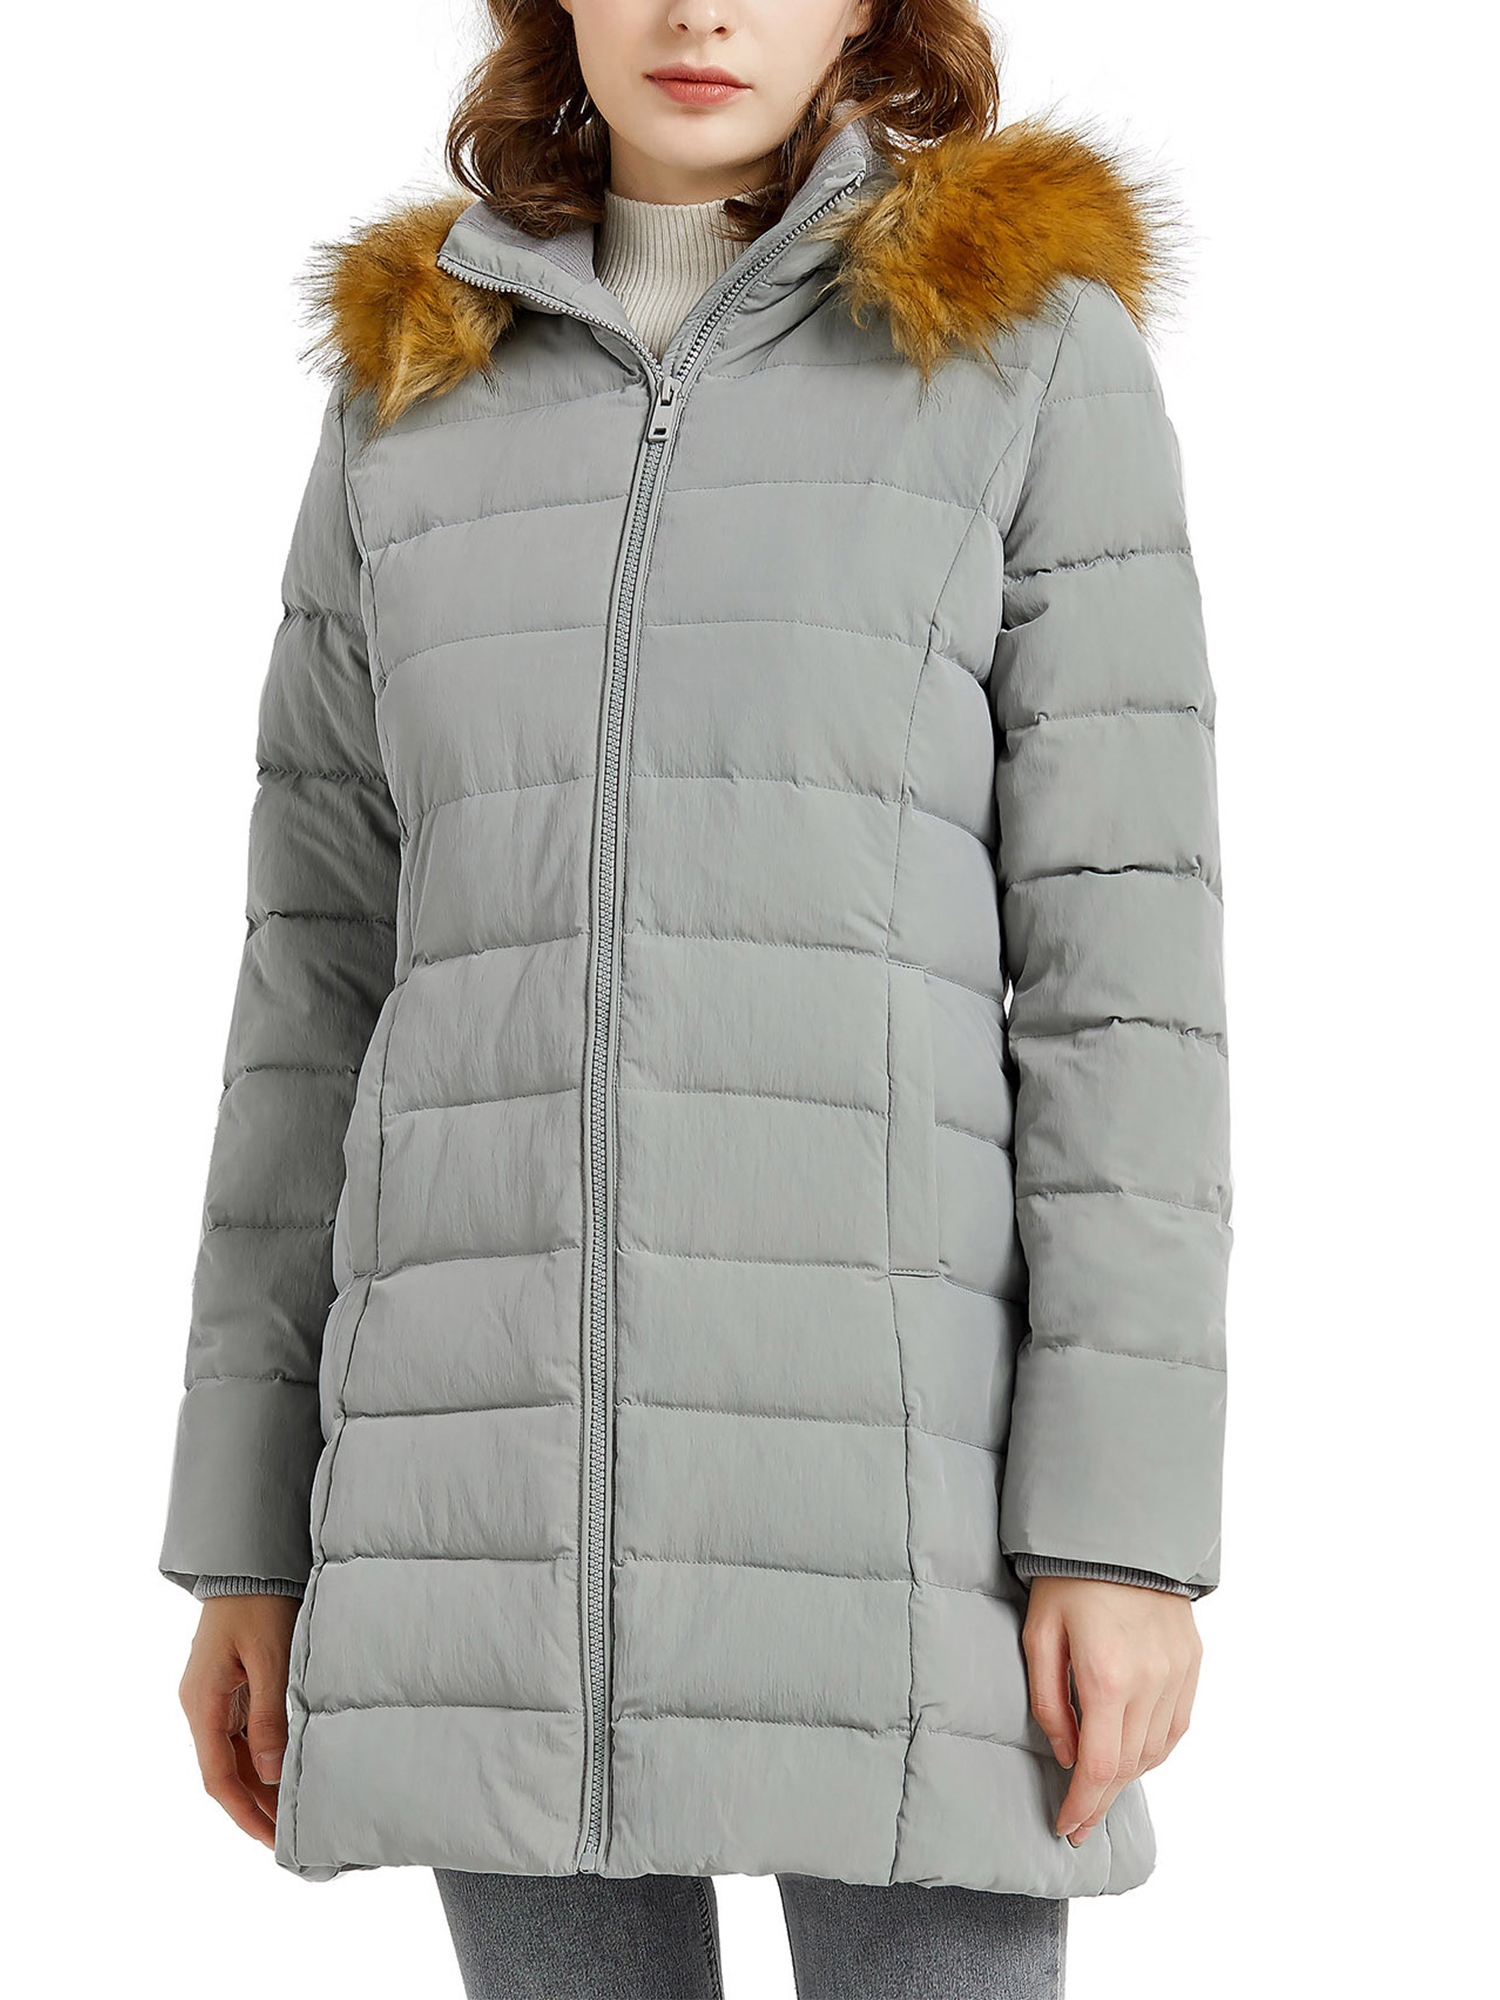 Orolay Women's Lightweight Quilted Down Jackets Water Resistant Slim Winter Coat Grey L - image 1 of 5